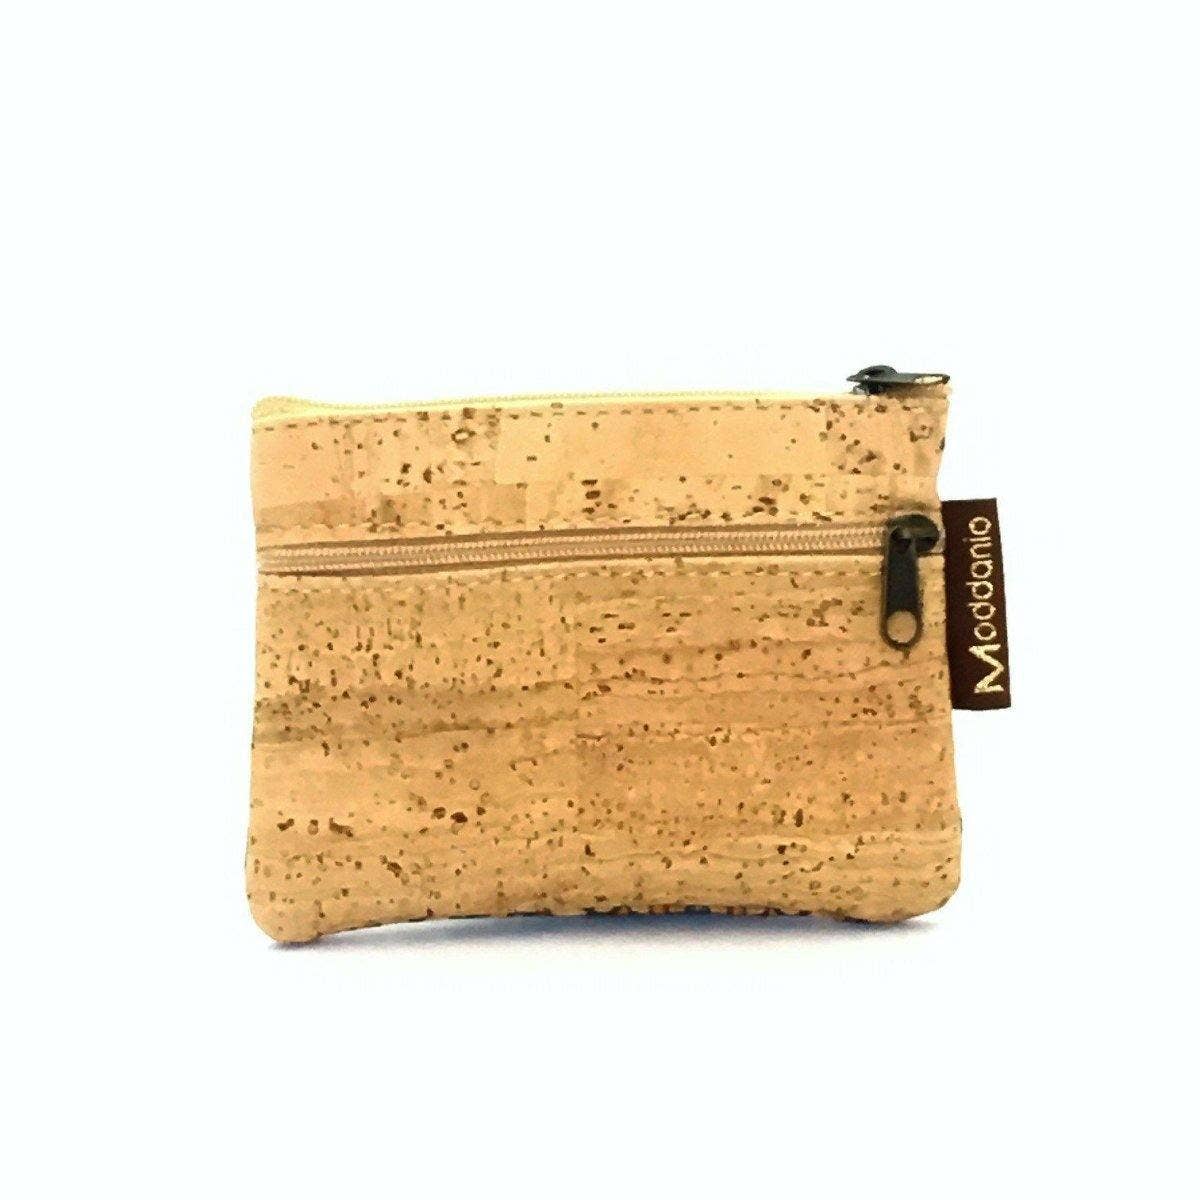 Cork Coin Purse and Vegan Change Pouch in a dark brown, orange, blue and green pattern